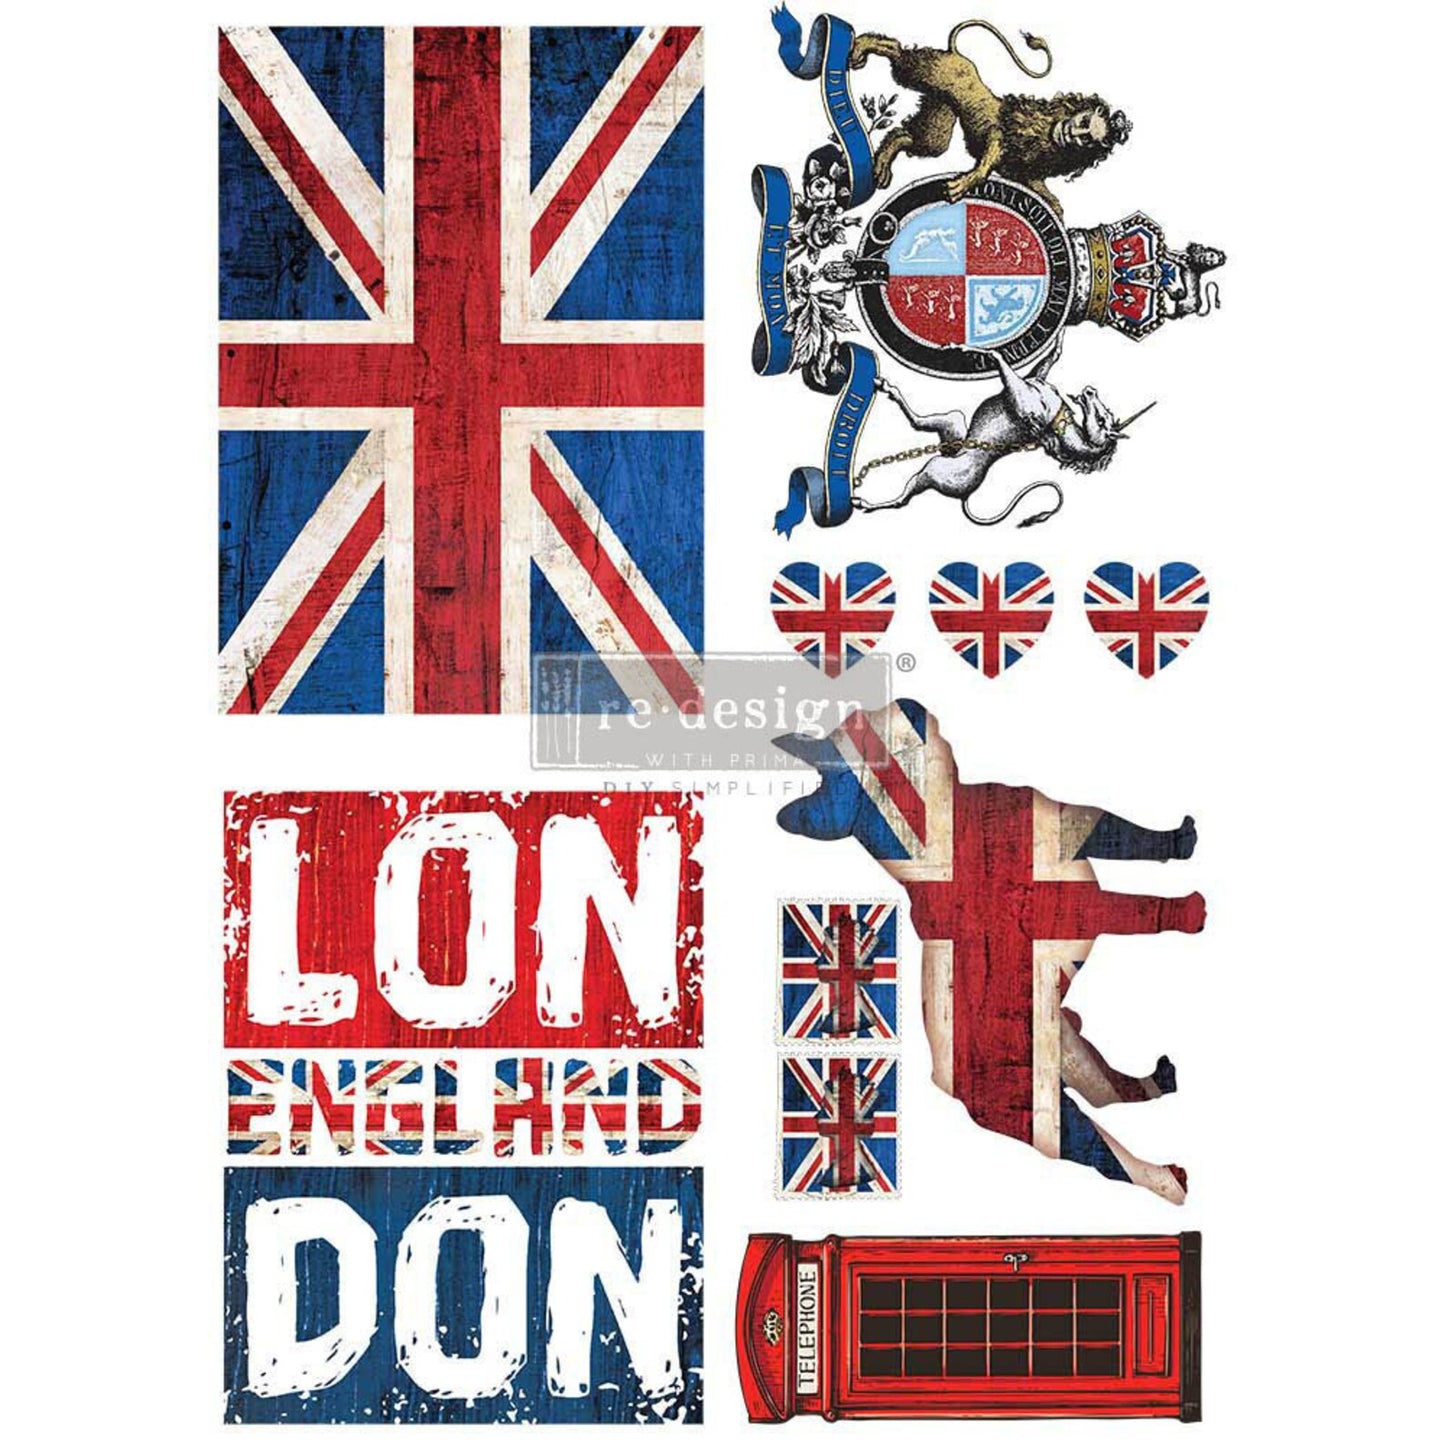 LONDON LOVE, Furniture Transfer Decal by Re-Design with Prima, 24″X35″